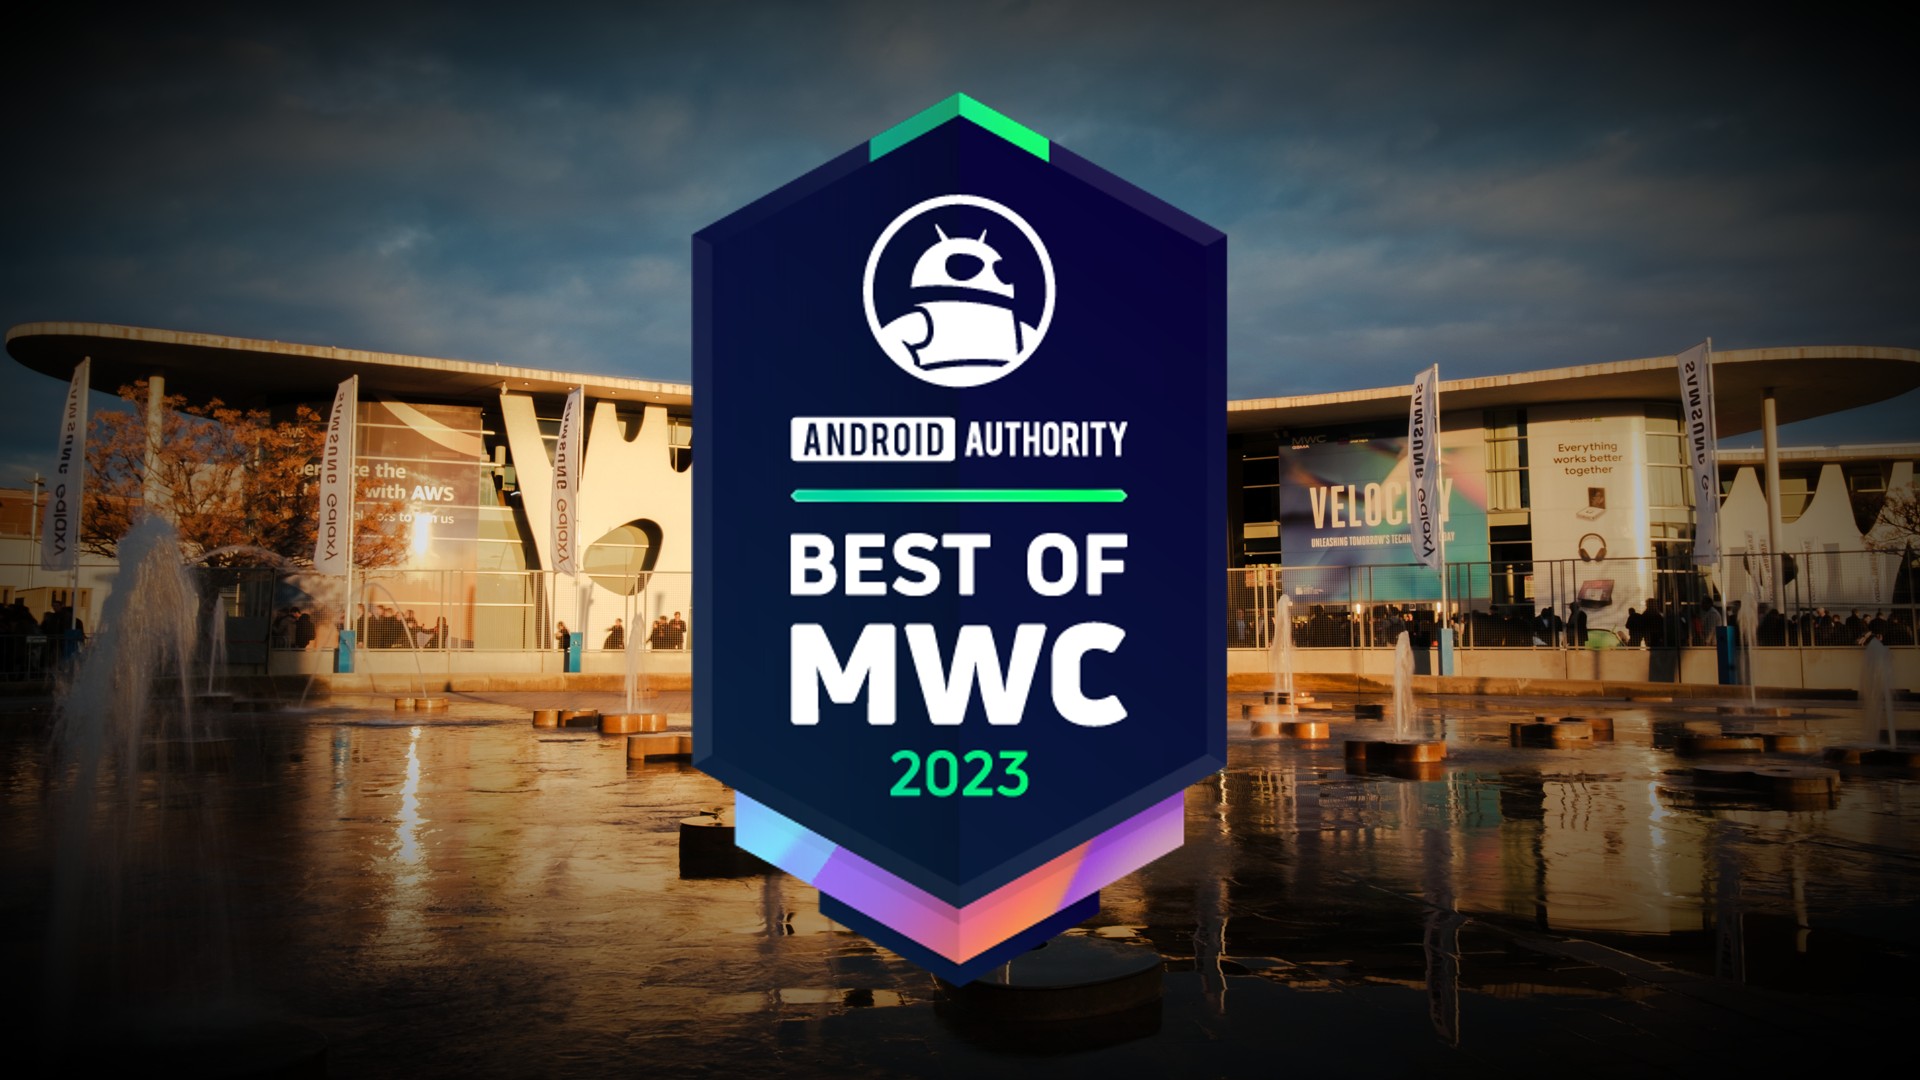 The best of mwc